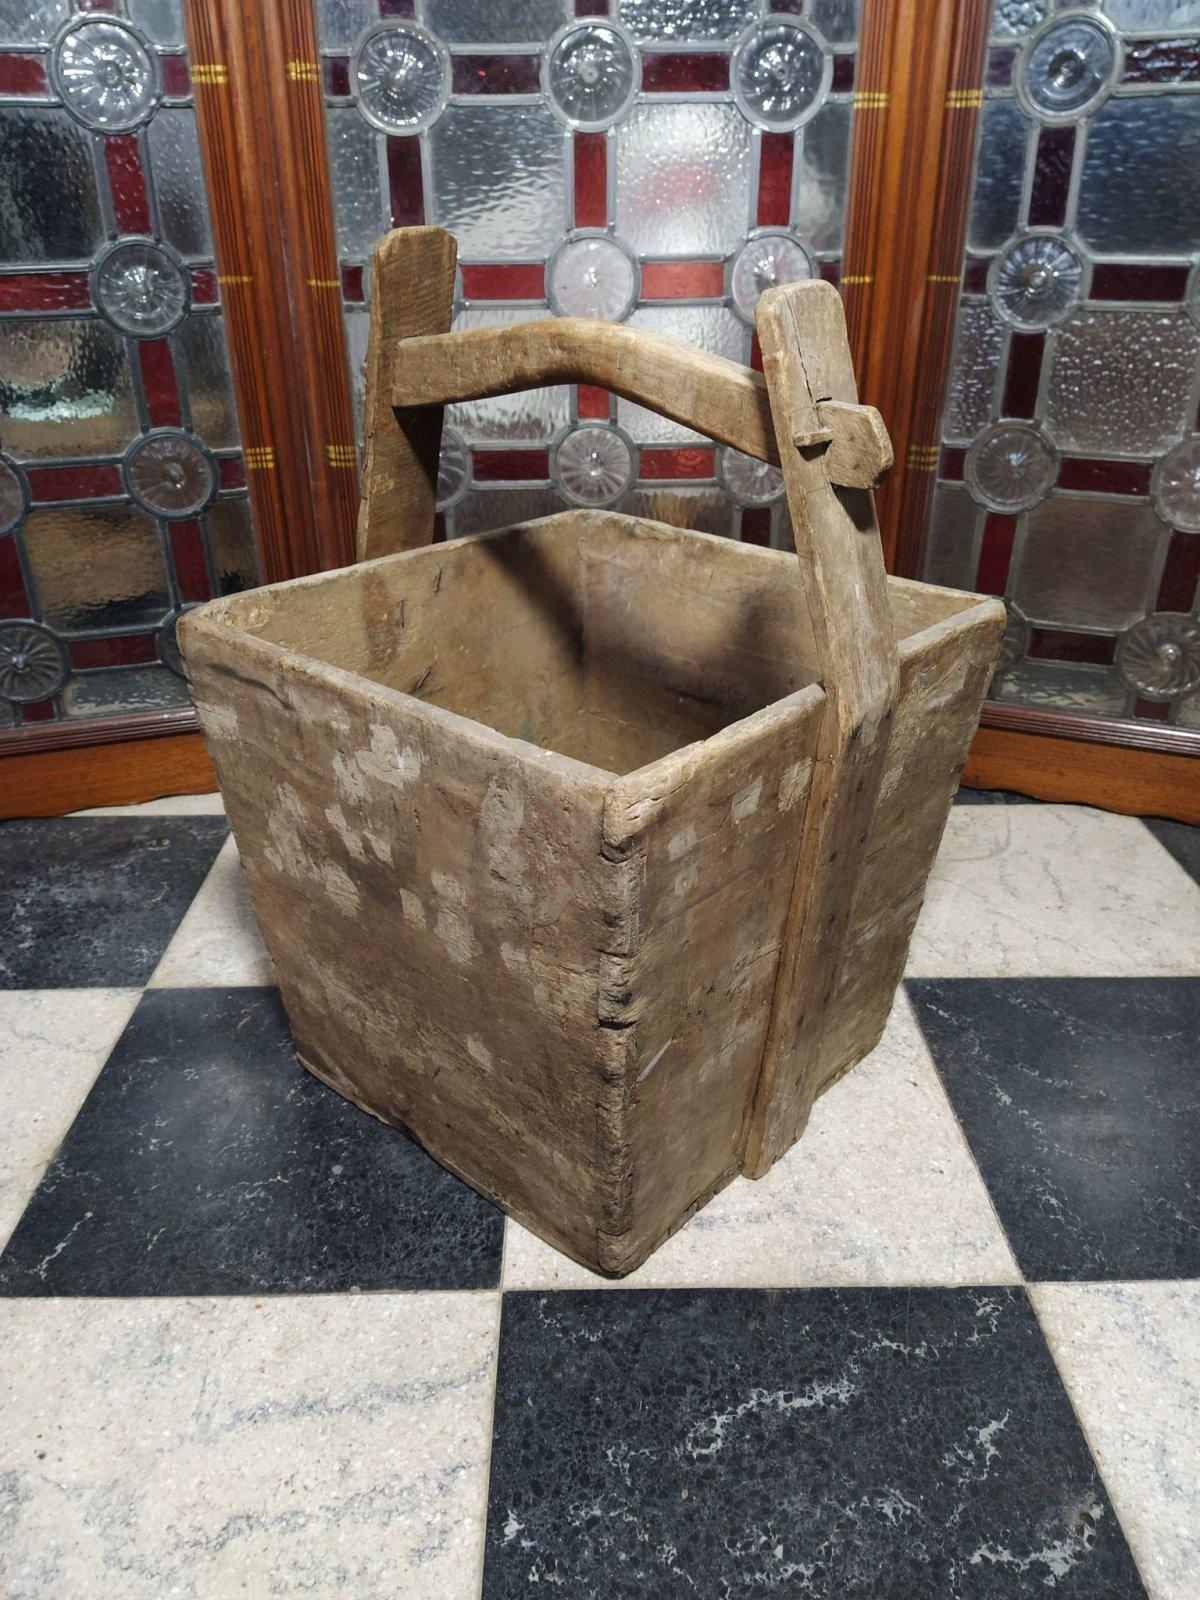 Chinese Export Chinese Antique Wooden Handled Bucket Originally Used to Carry and Measure Rice For Sale